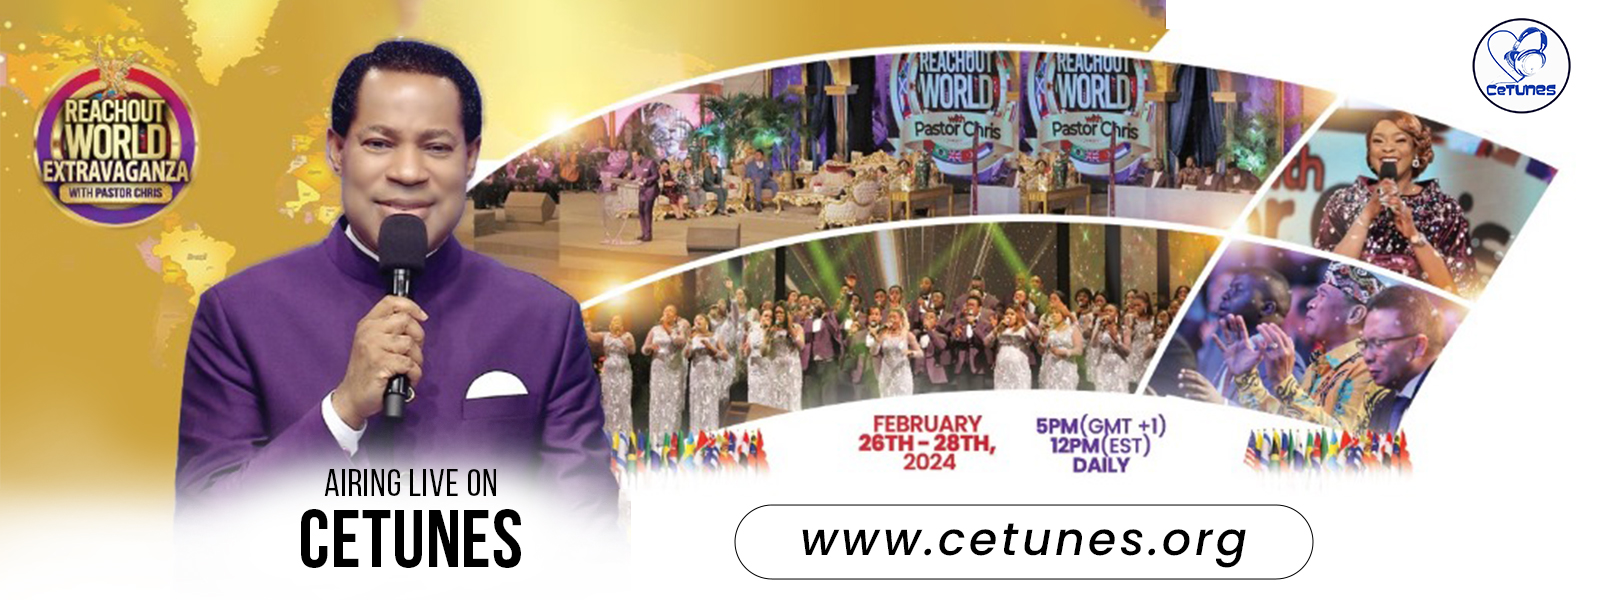 REACHOUT WORLD EXTRAVAGANZA WITH THE MAN OF GOD PASTOR CHRIS 